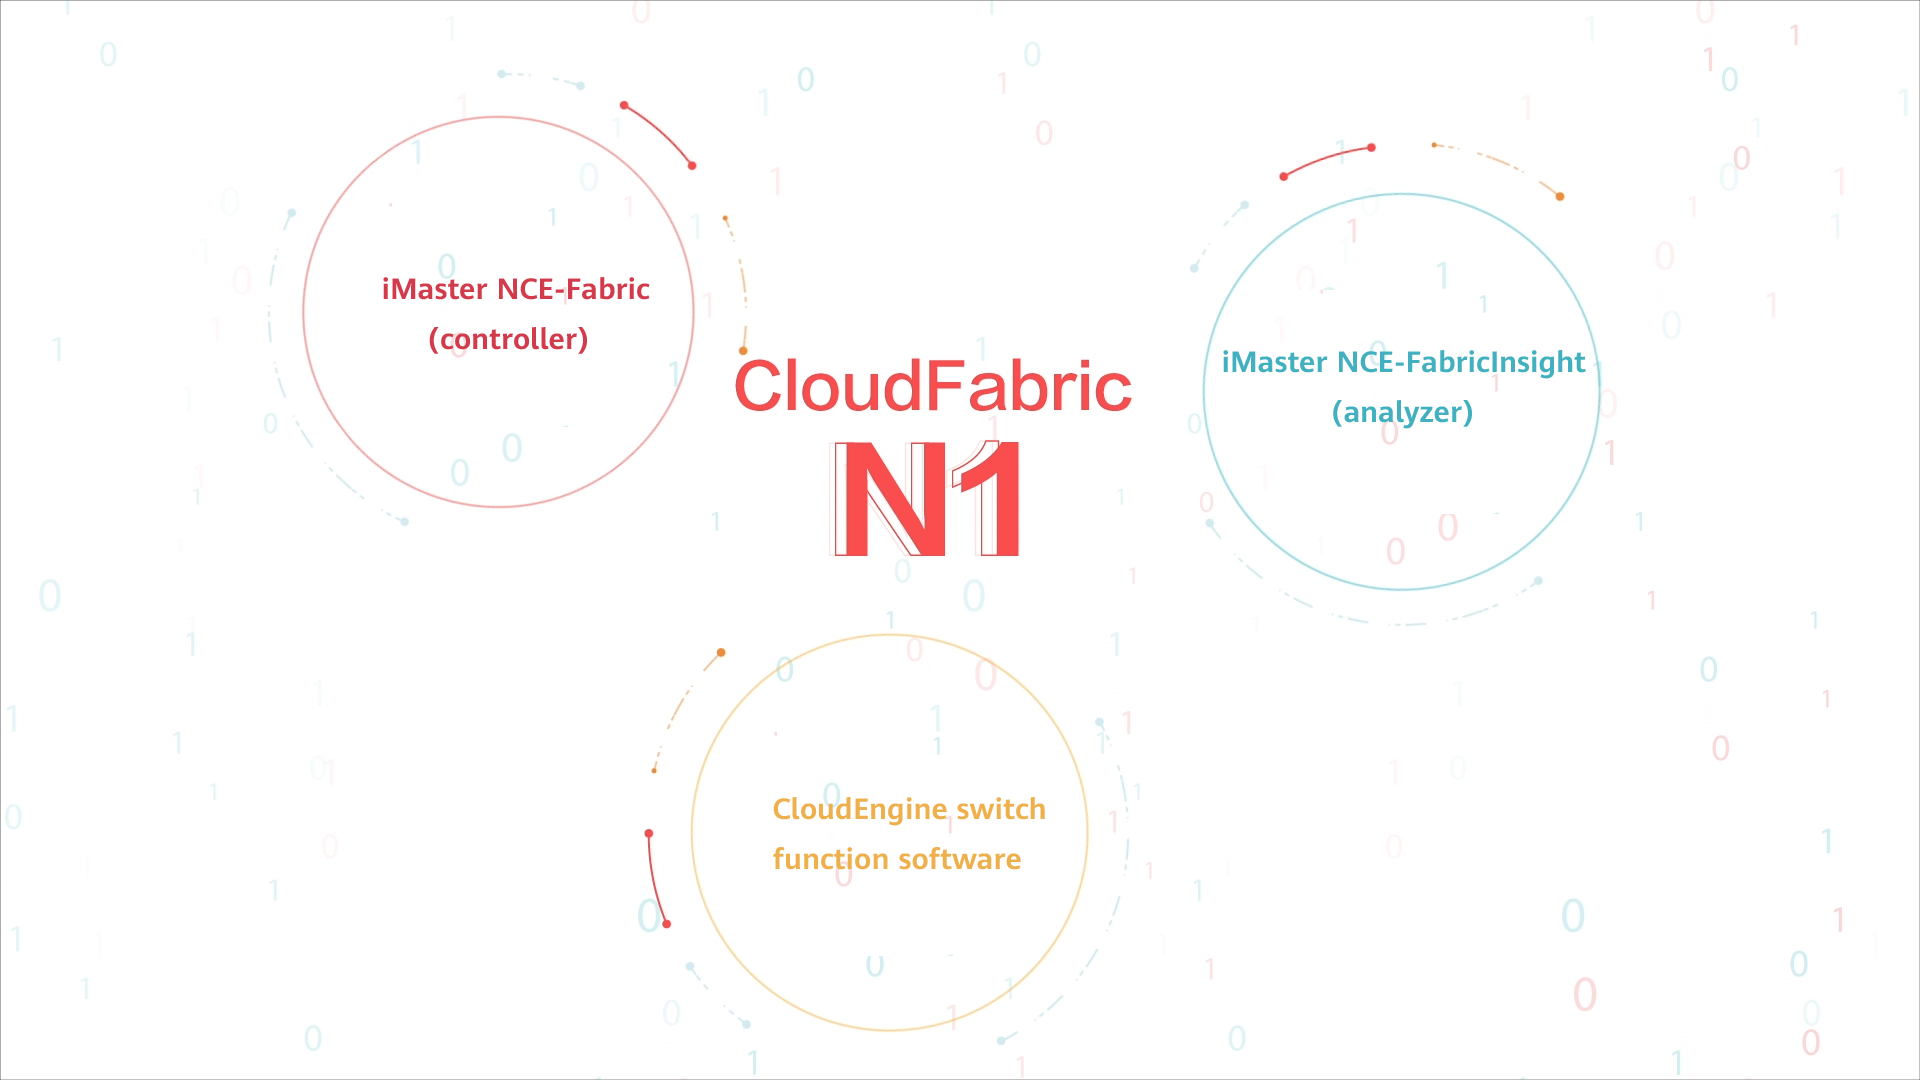 CloudFabric N1 business model